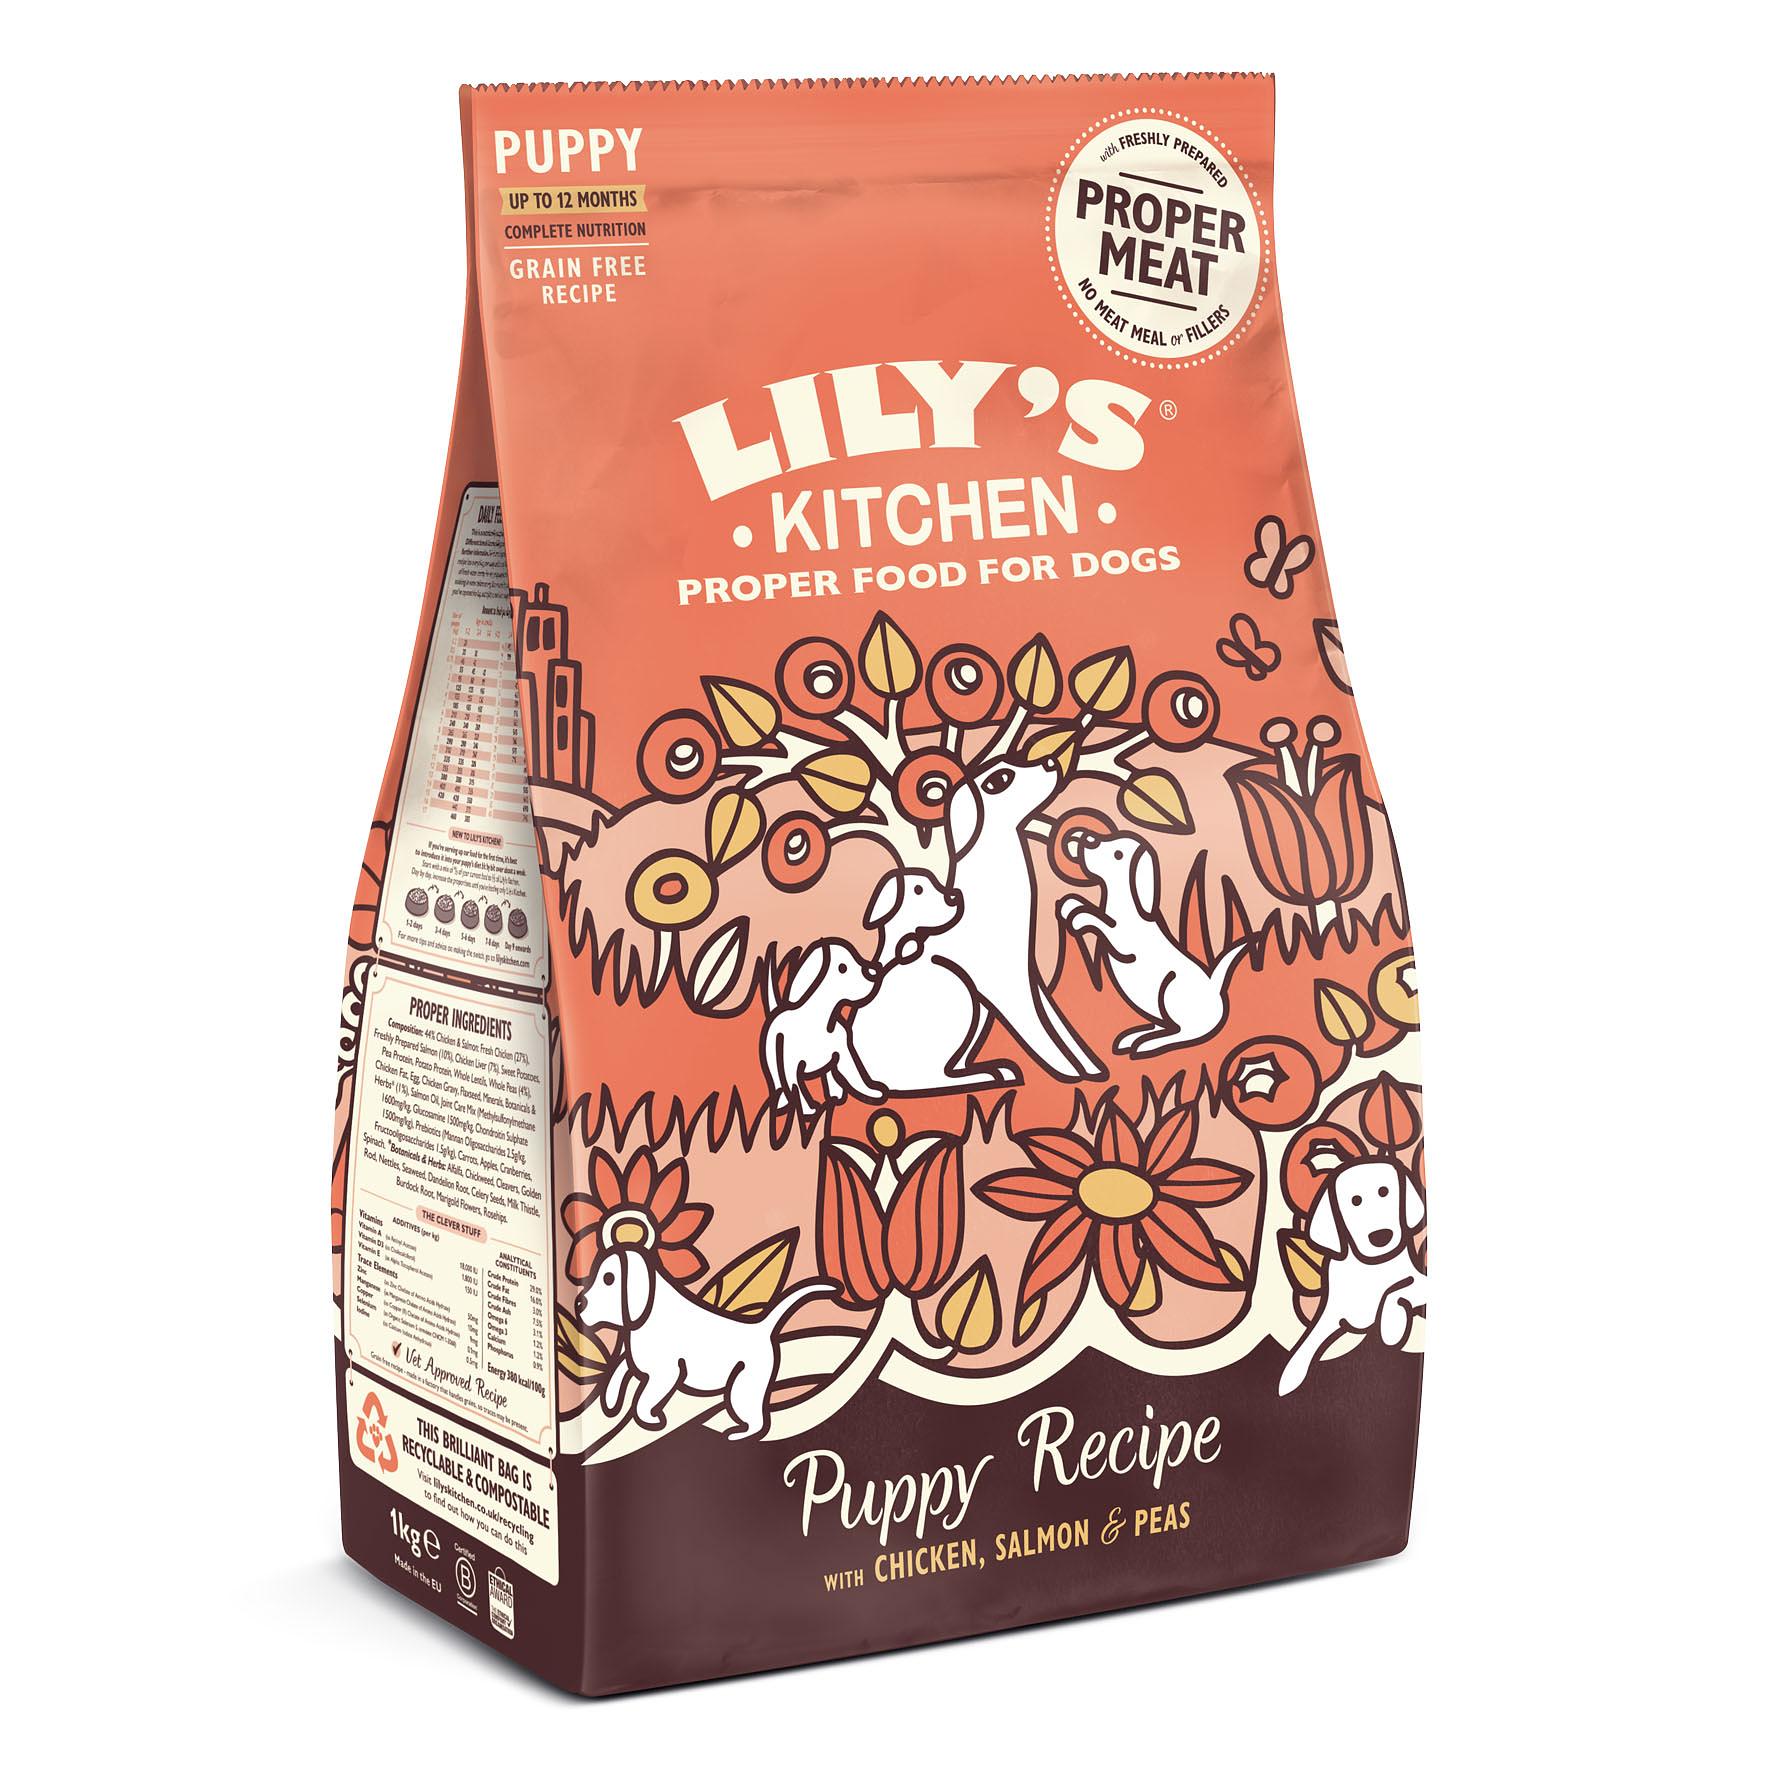 Lily's Kitchen Dog Puppy Huhn & Lachs